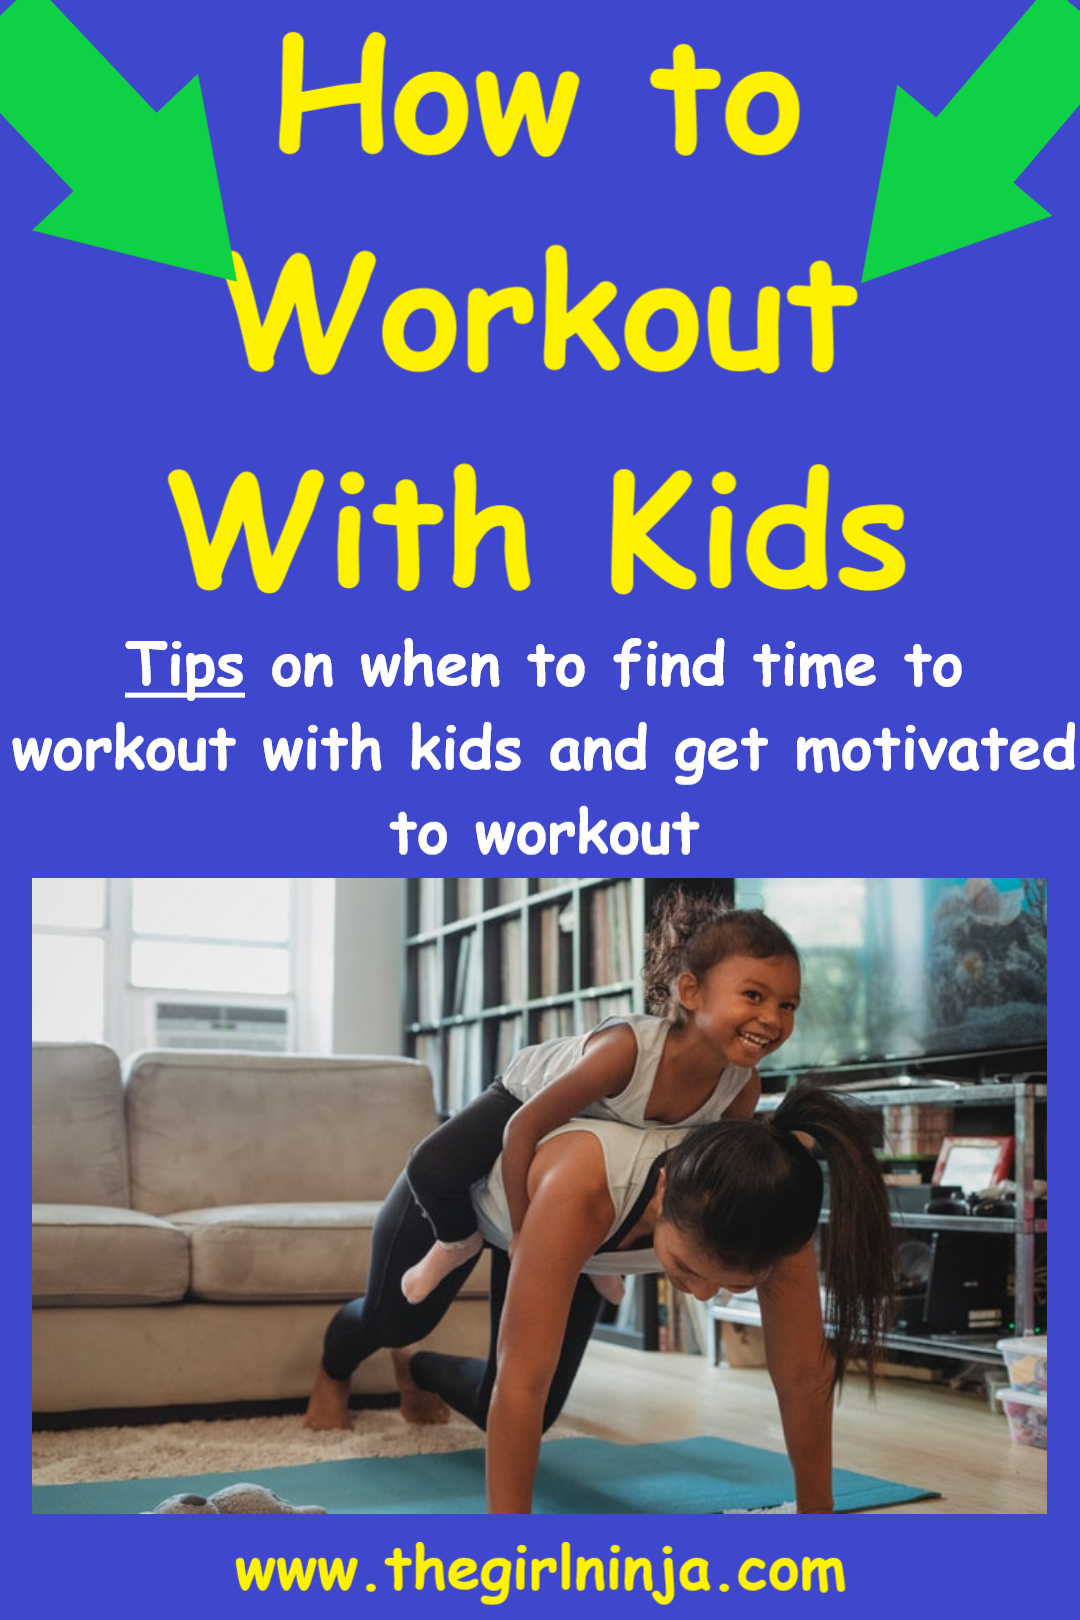 Bright blue rectangle with diagonal green arrows coming out of top corners pointing to yellow text that reads How to Workout With Kids Tips on when to find time to workout with kids and get motivated to workout. Below text a woman is in a mountain climber position with a little girl saddling her back. At bottom center of rectangle yellow text reads www.thegirlninja.com